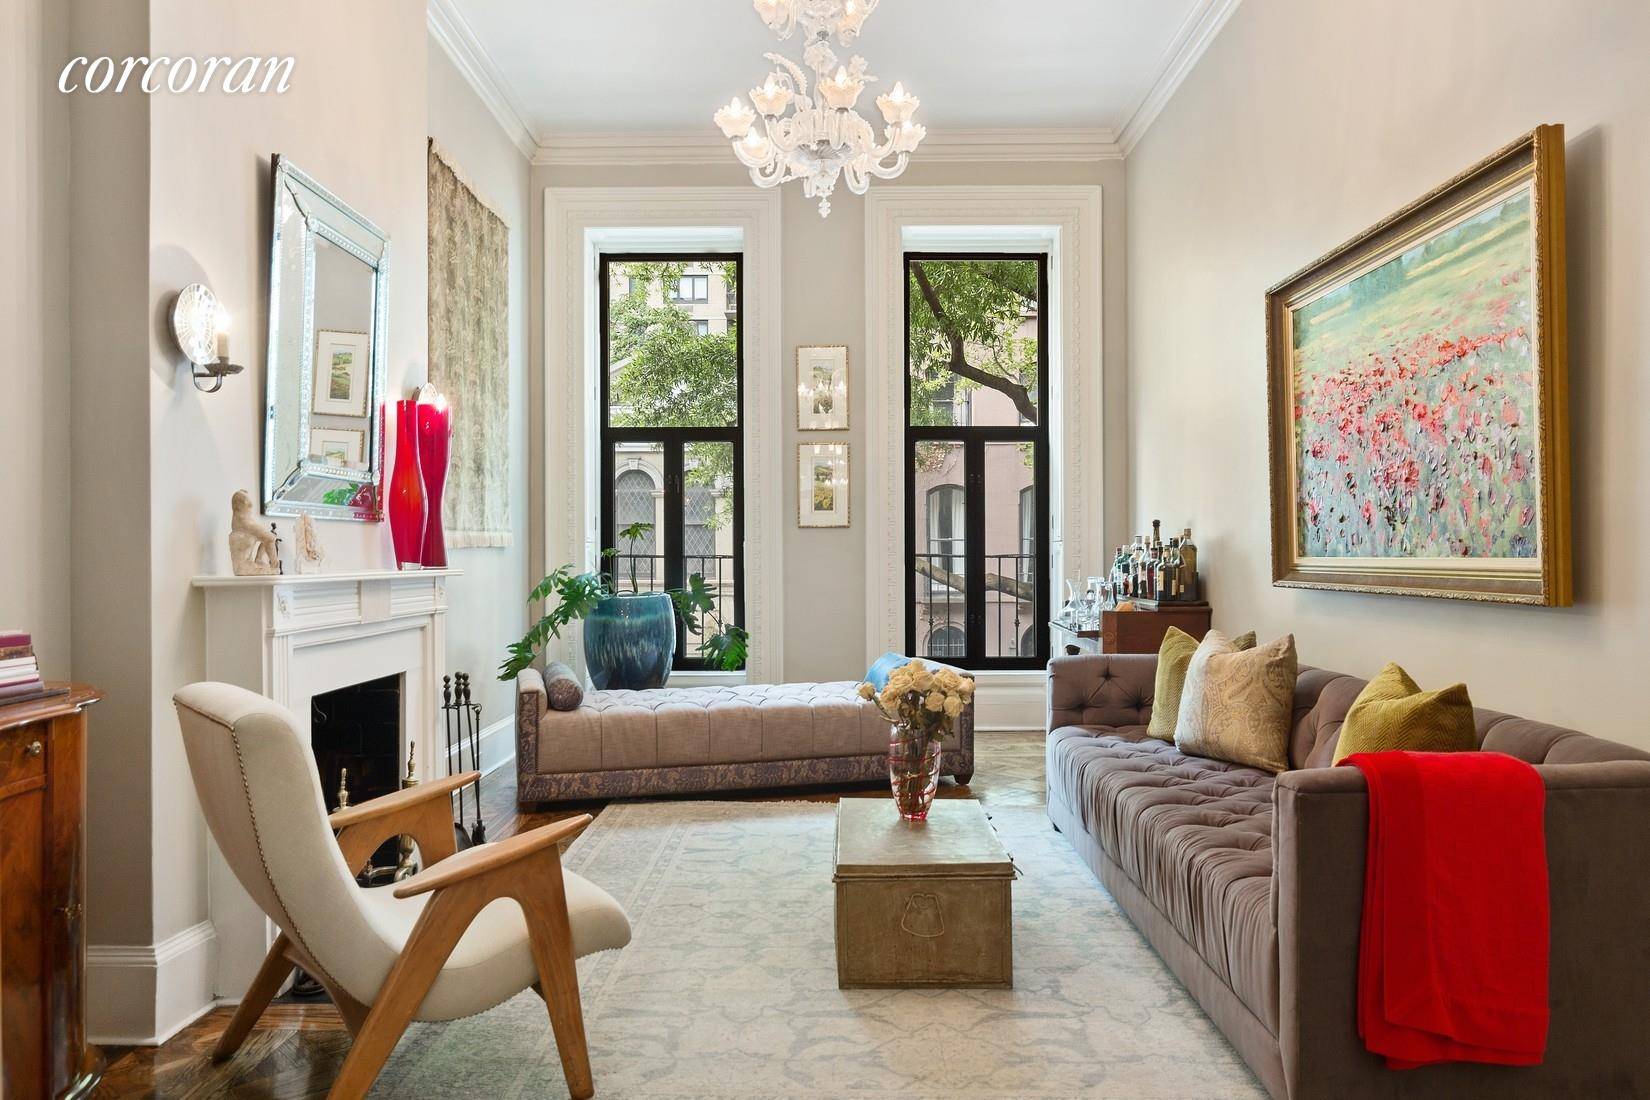 Enjoy your own private sanctuary in the city in a magnificent townhouse with a grand private entrance, plenty of room to work from home, and outdoor space, including a private ...